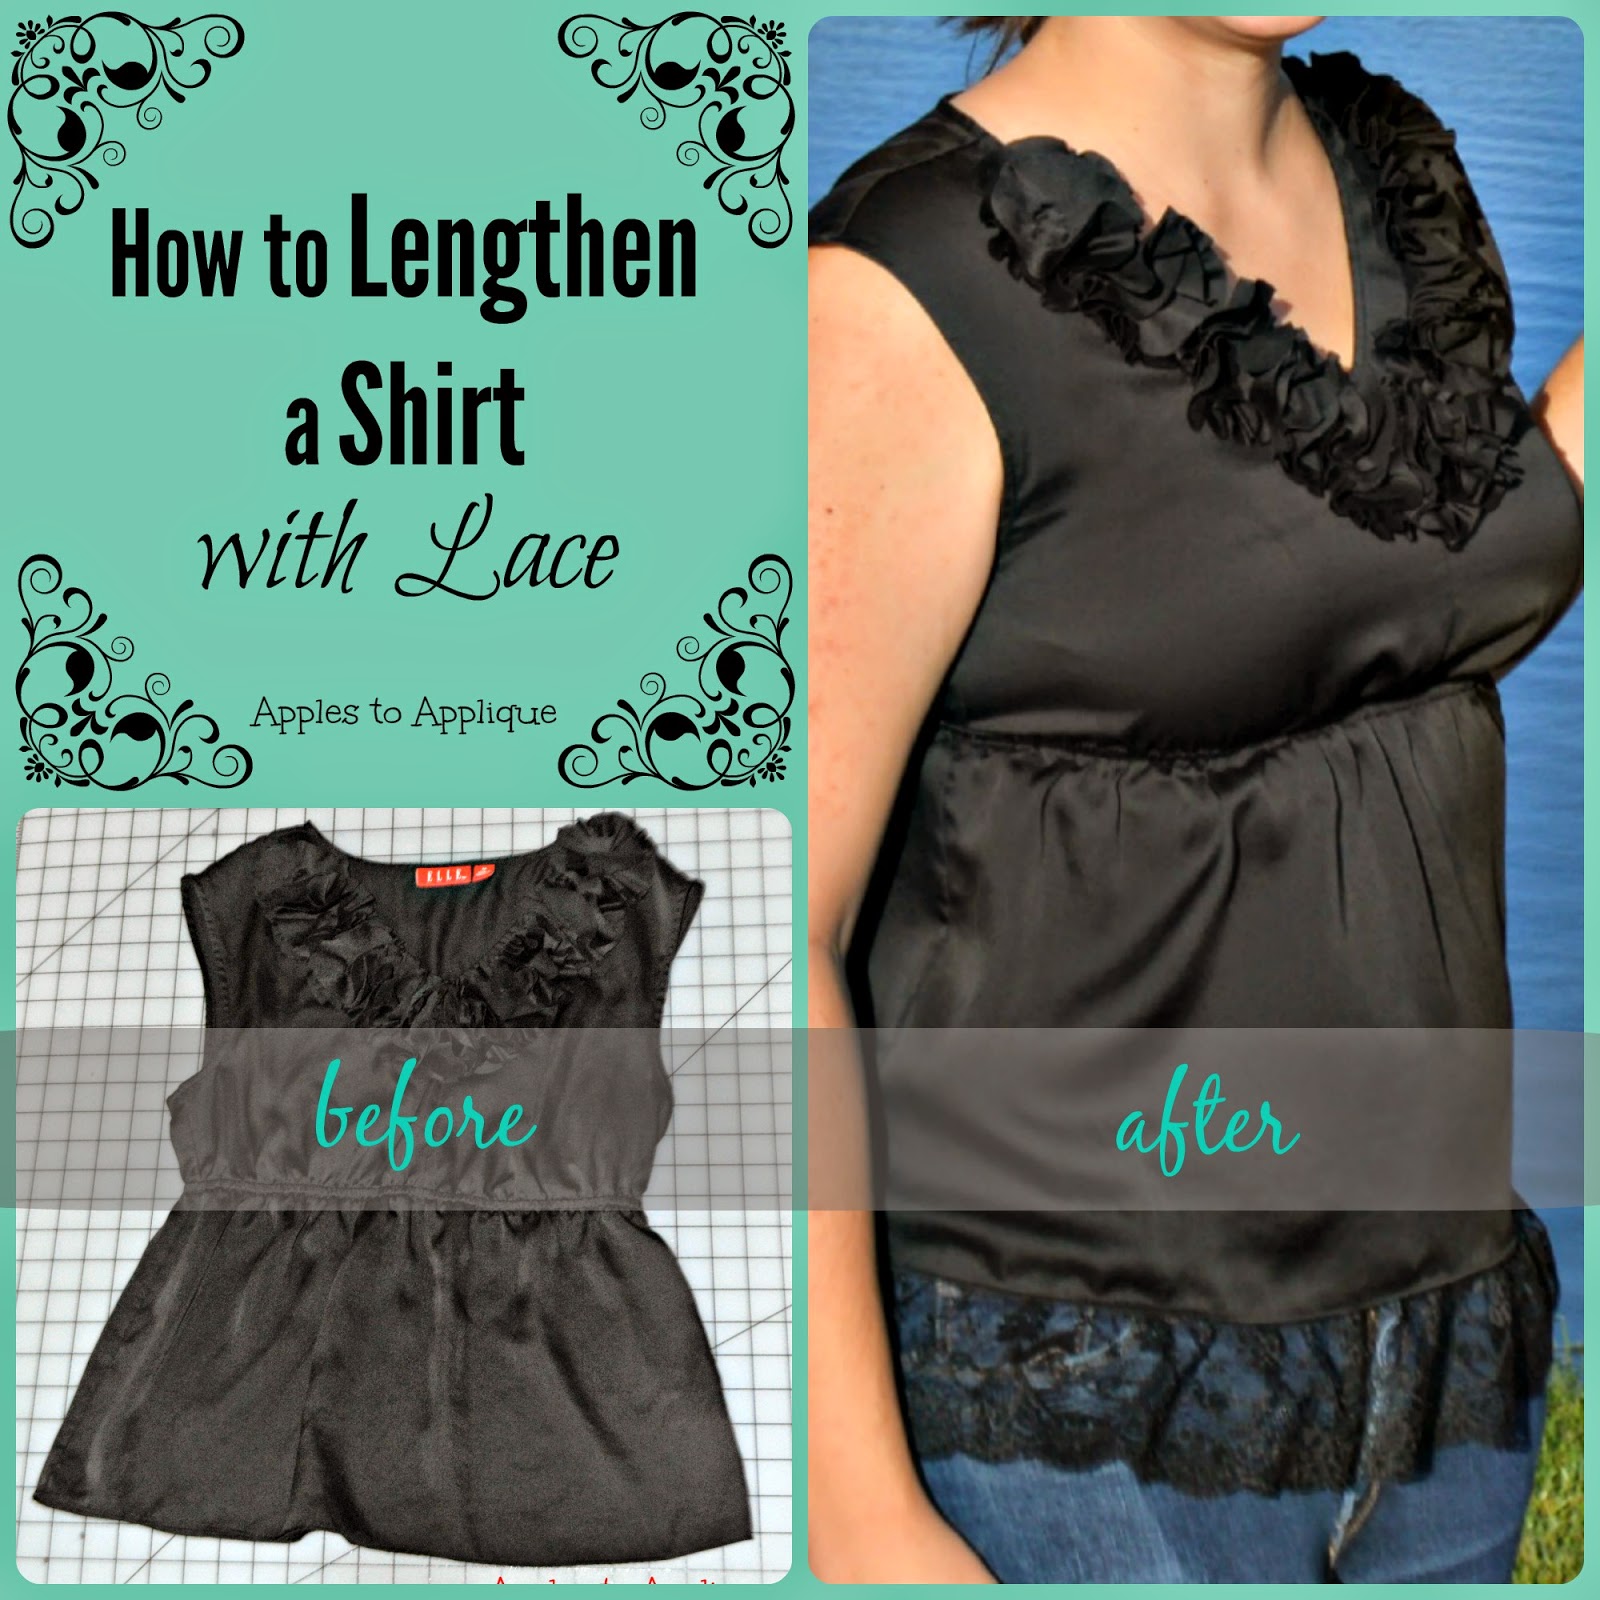 Apples to Applique: How to Lengthen a Shirt with Lace